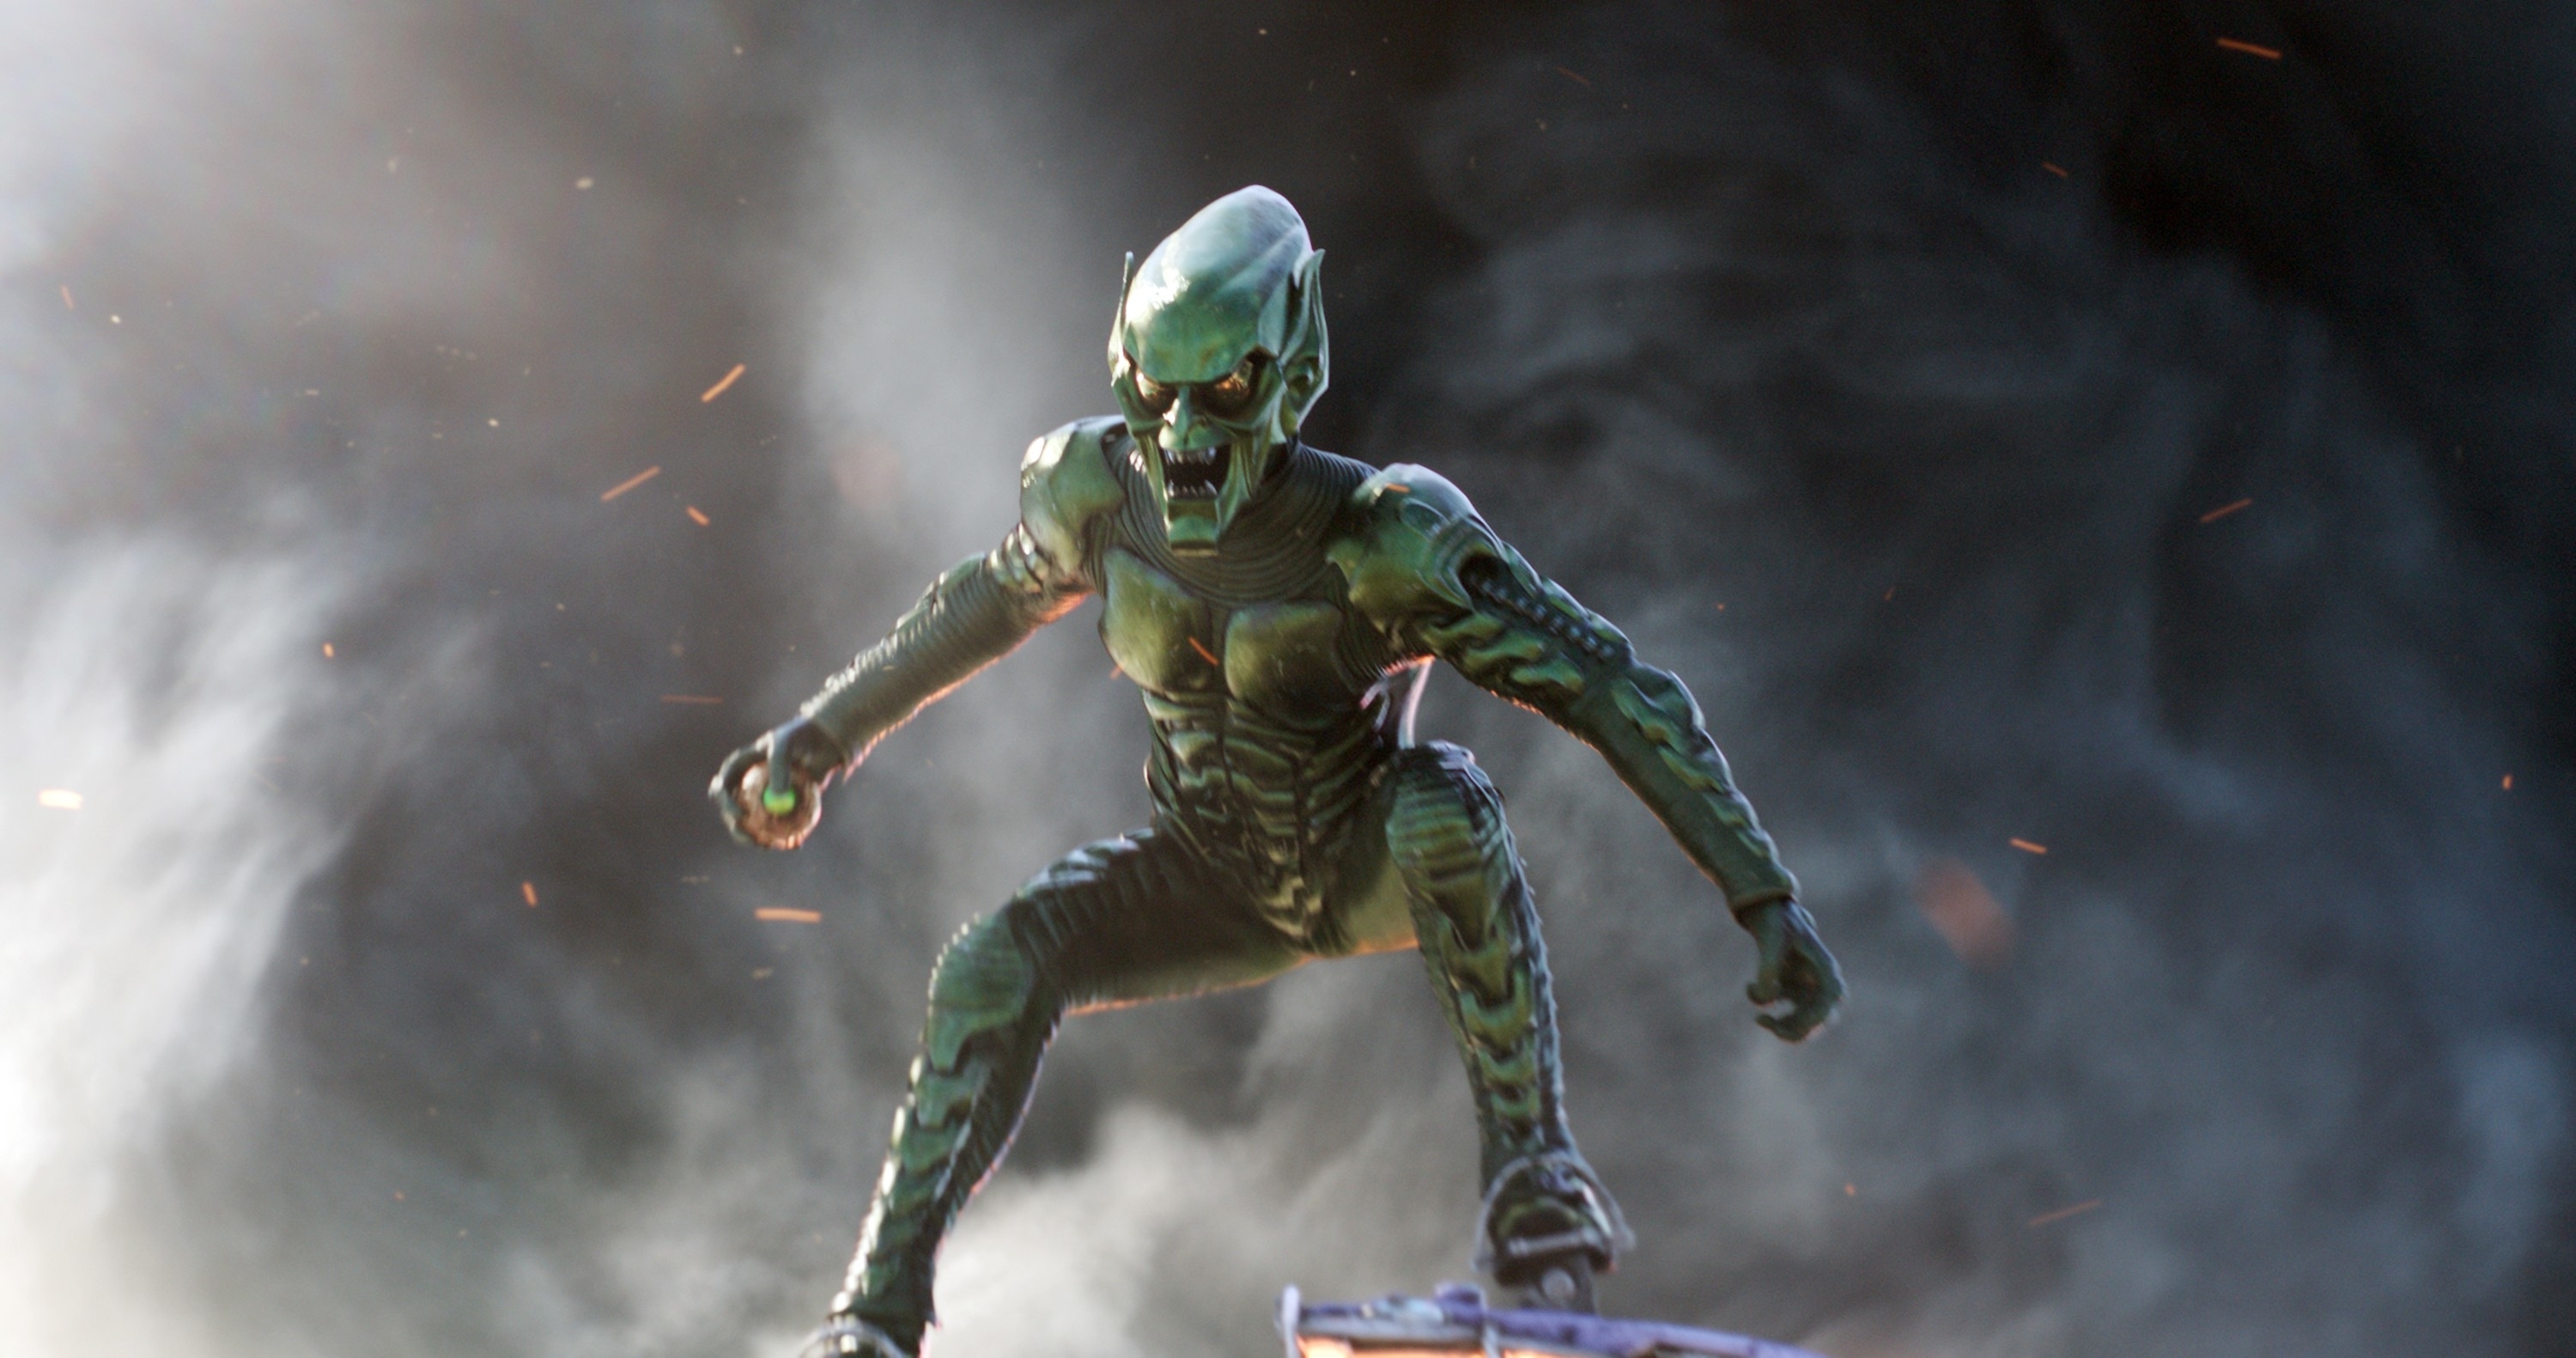 Image of a figurine based on an alien character from a sci-fi franchise, posed aggressively with a smoky background